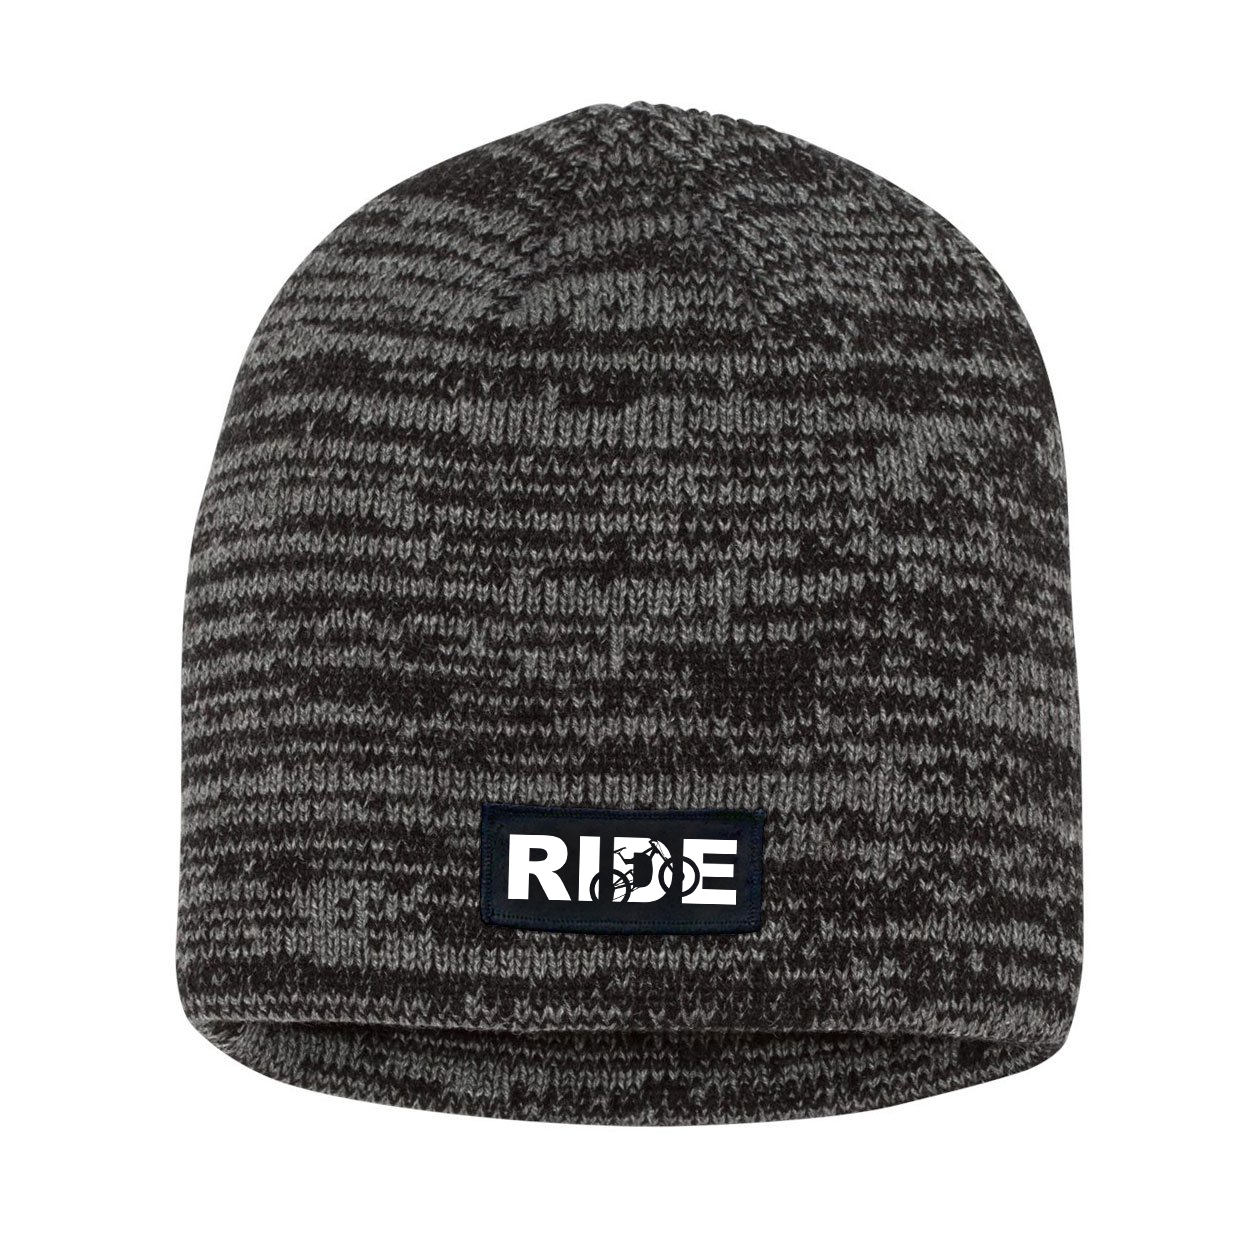 Ride Mtb Logo Night Out Woven Patch Skully Marled Knit Beanie Black/Gray (White Logo)